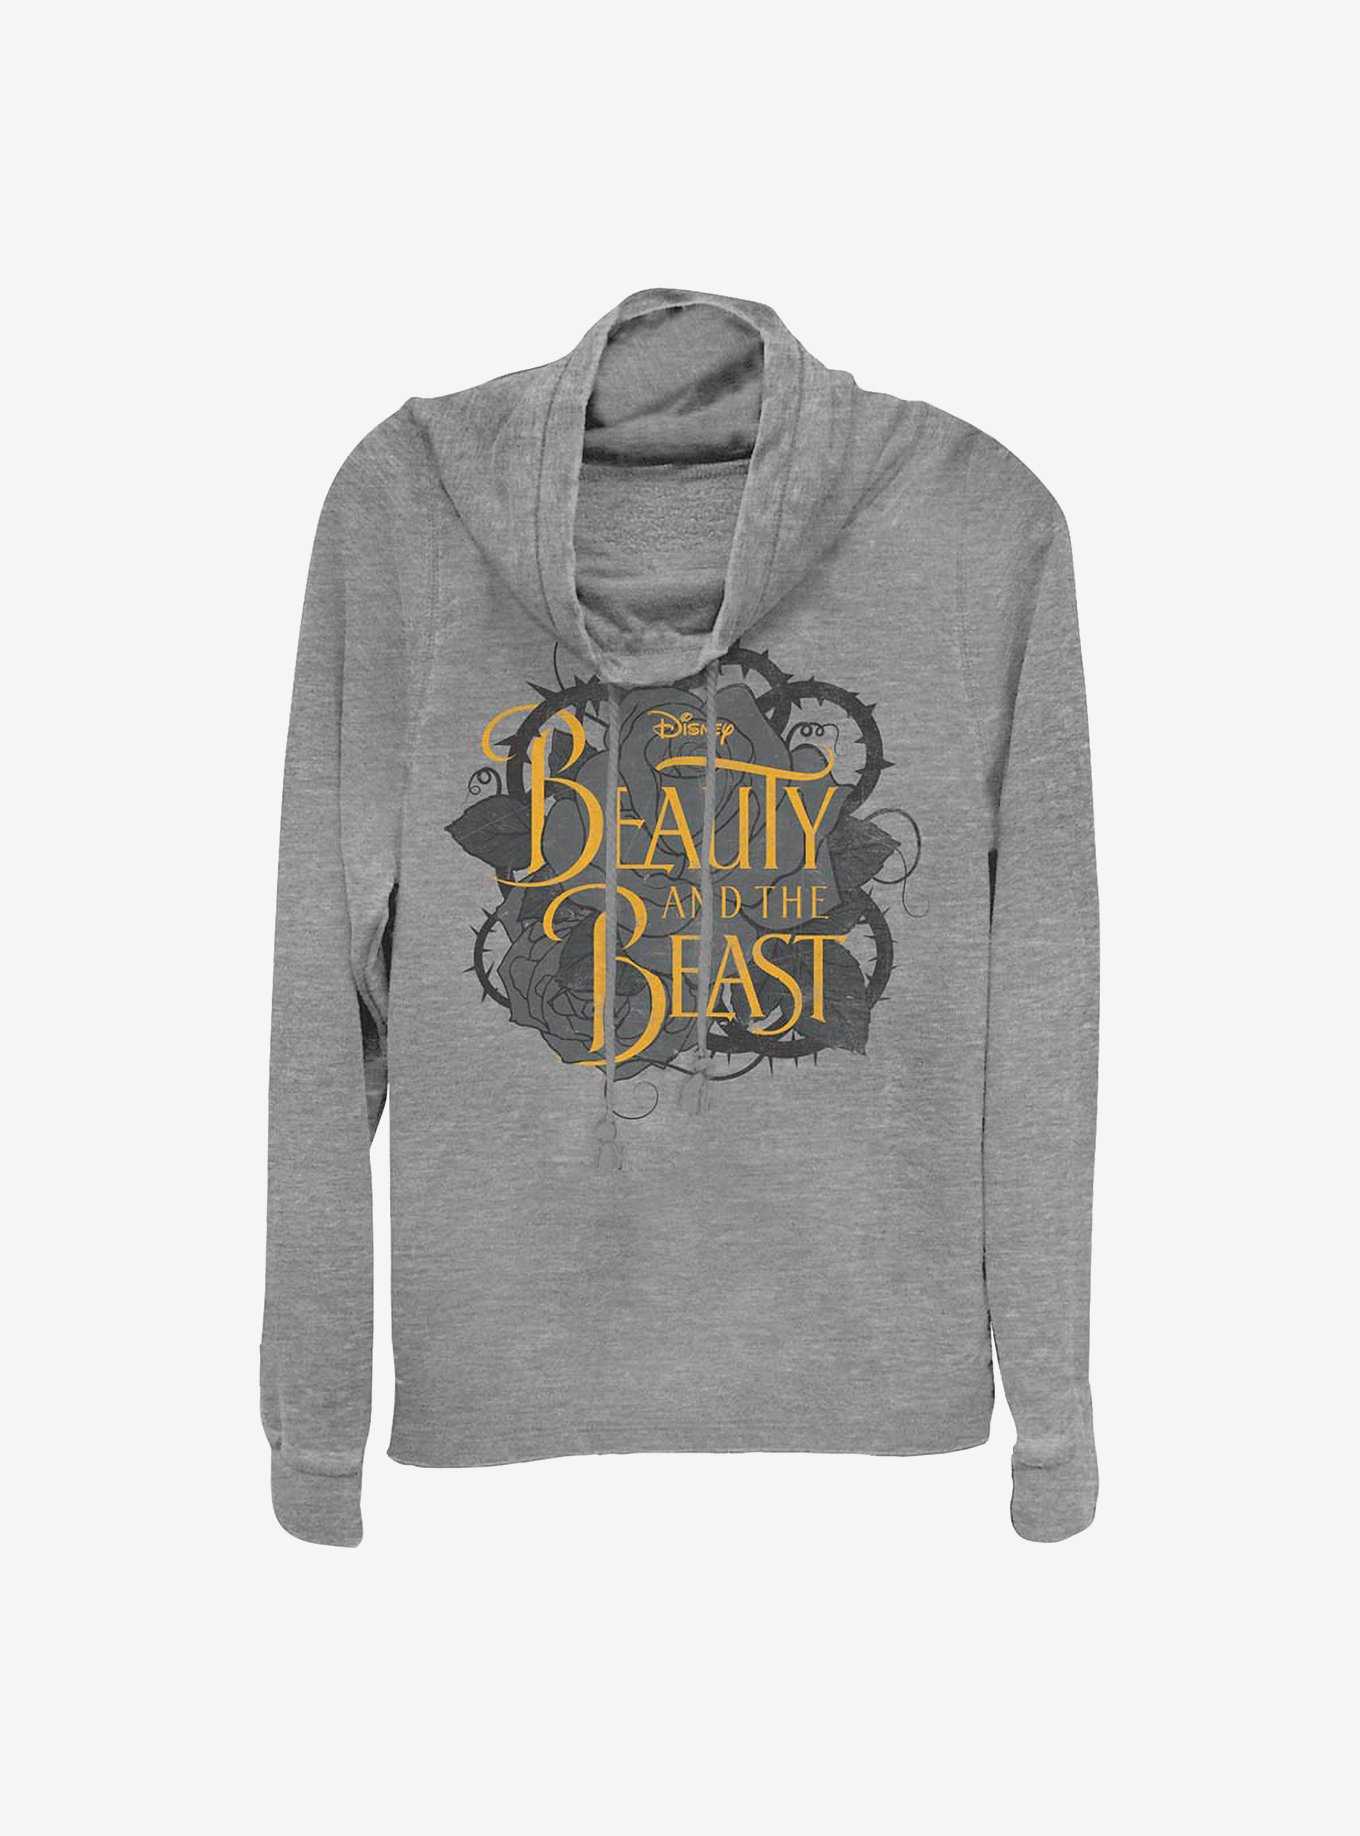 Disney Beauty And The Beast Live Action Logo Thorns Dark Cowlneck Long-Sleeve Girls Top, , hi-res